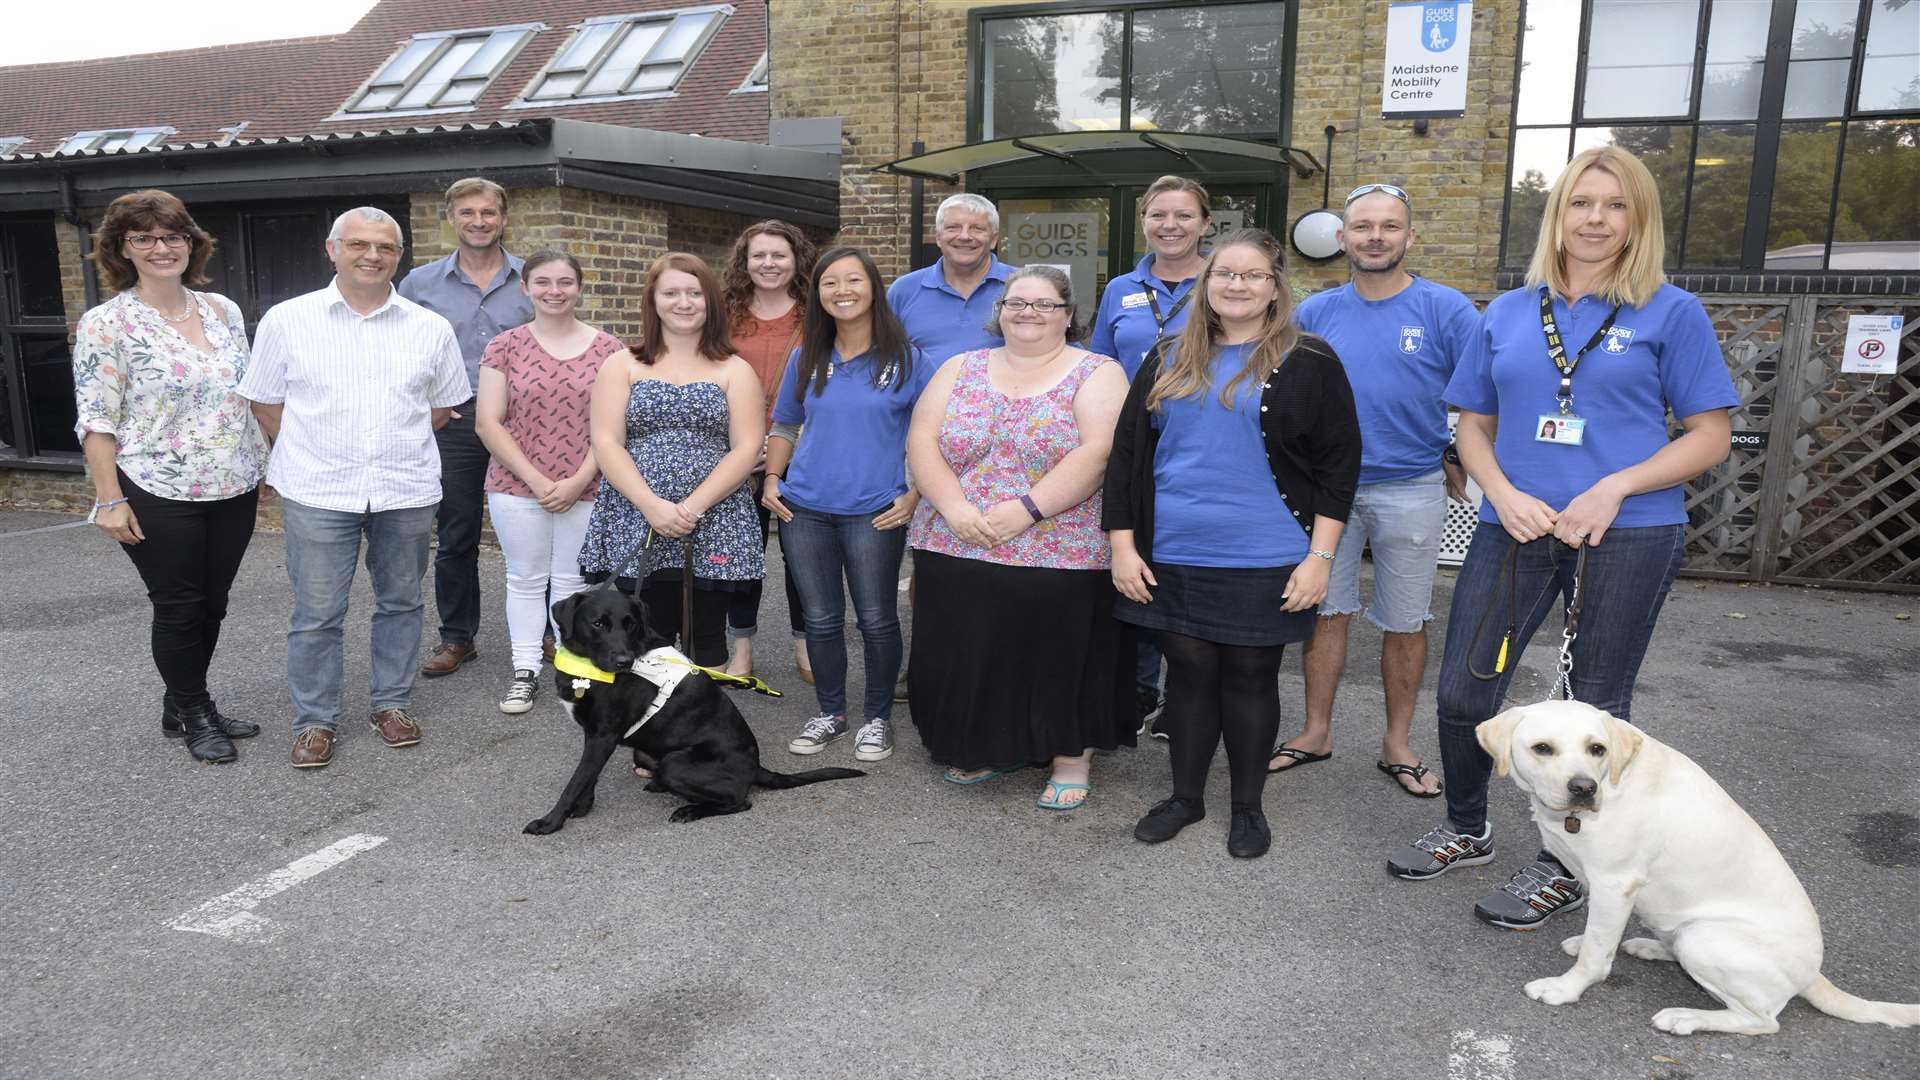 The Guide Dogs charity is turning 85 this year